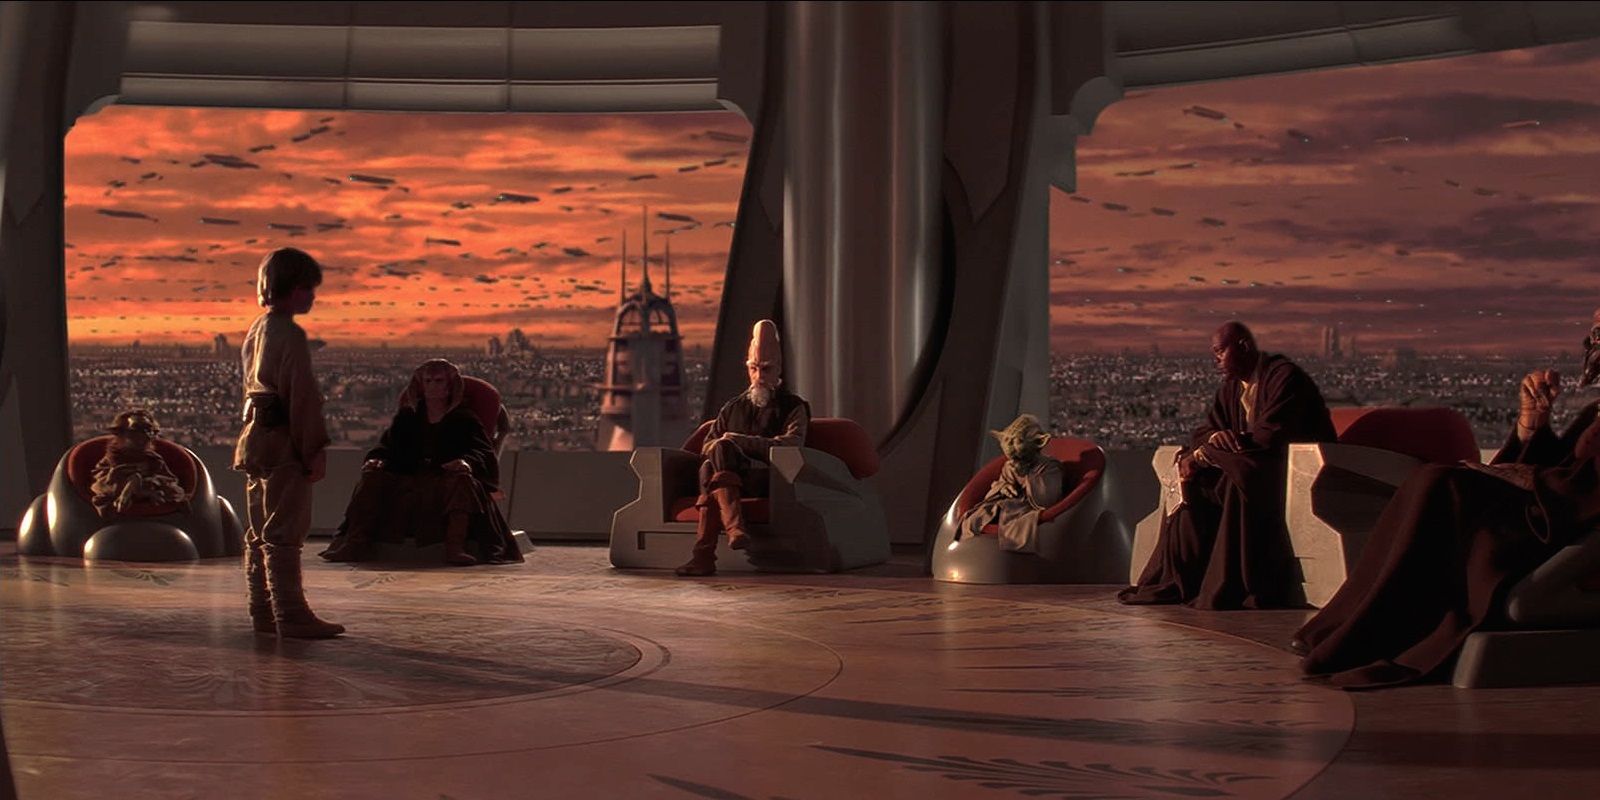 Anakin standing before the Jedi Council in The Phantom Menace